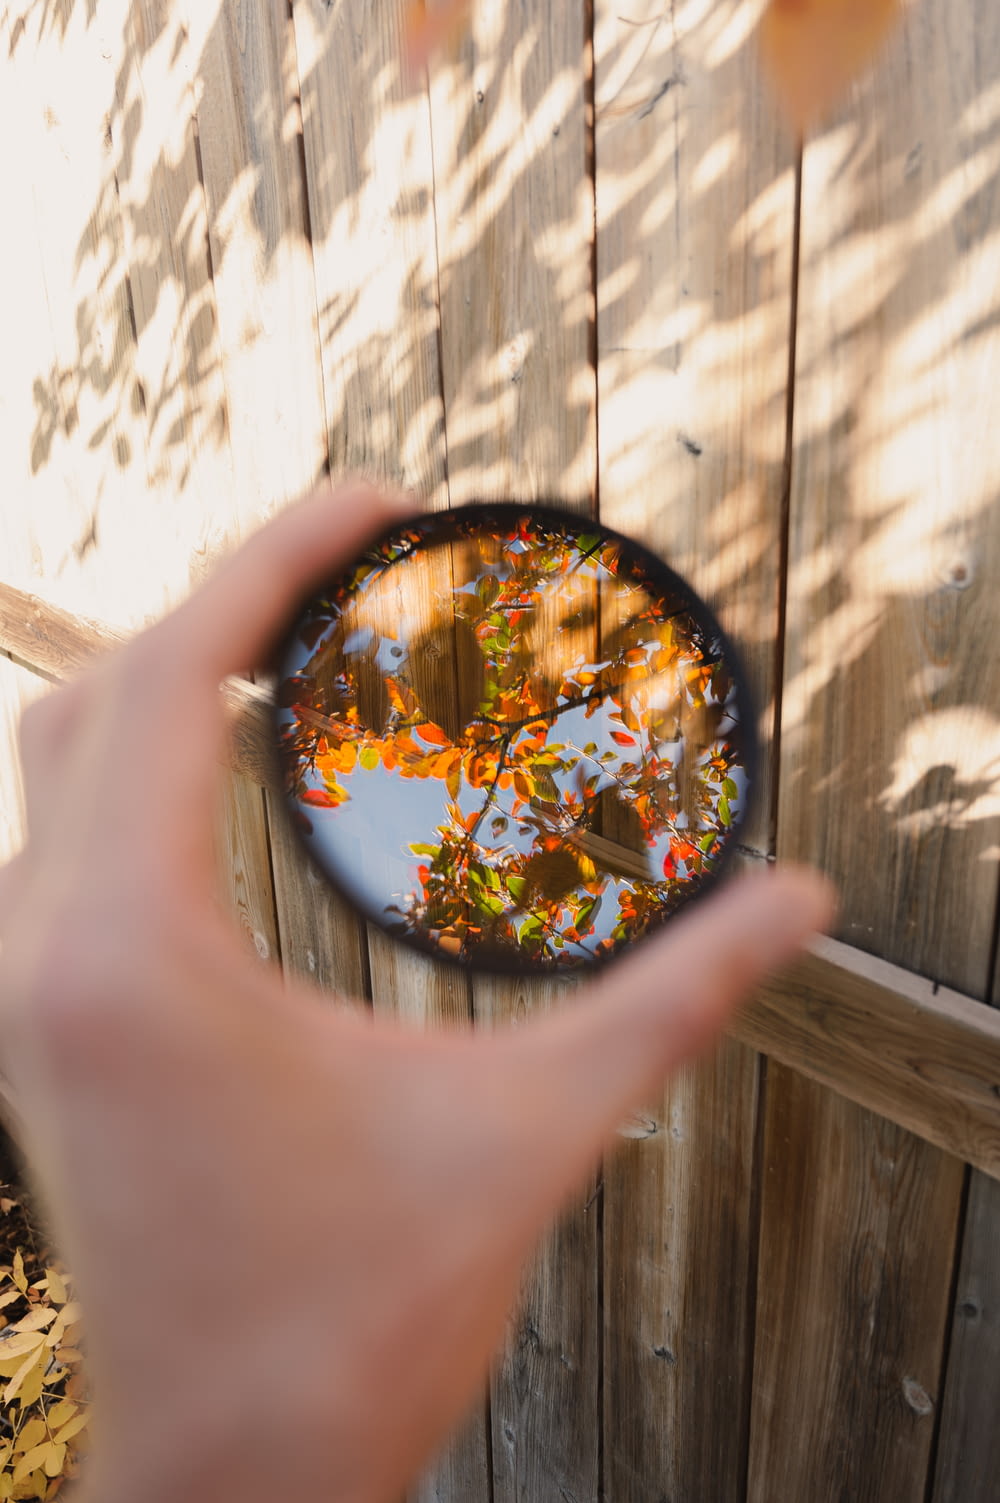 a person holding a plate with a reflection of a tree in it